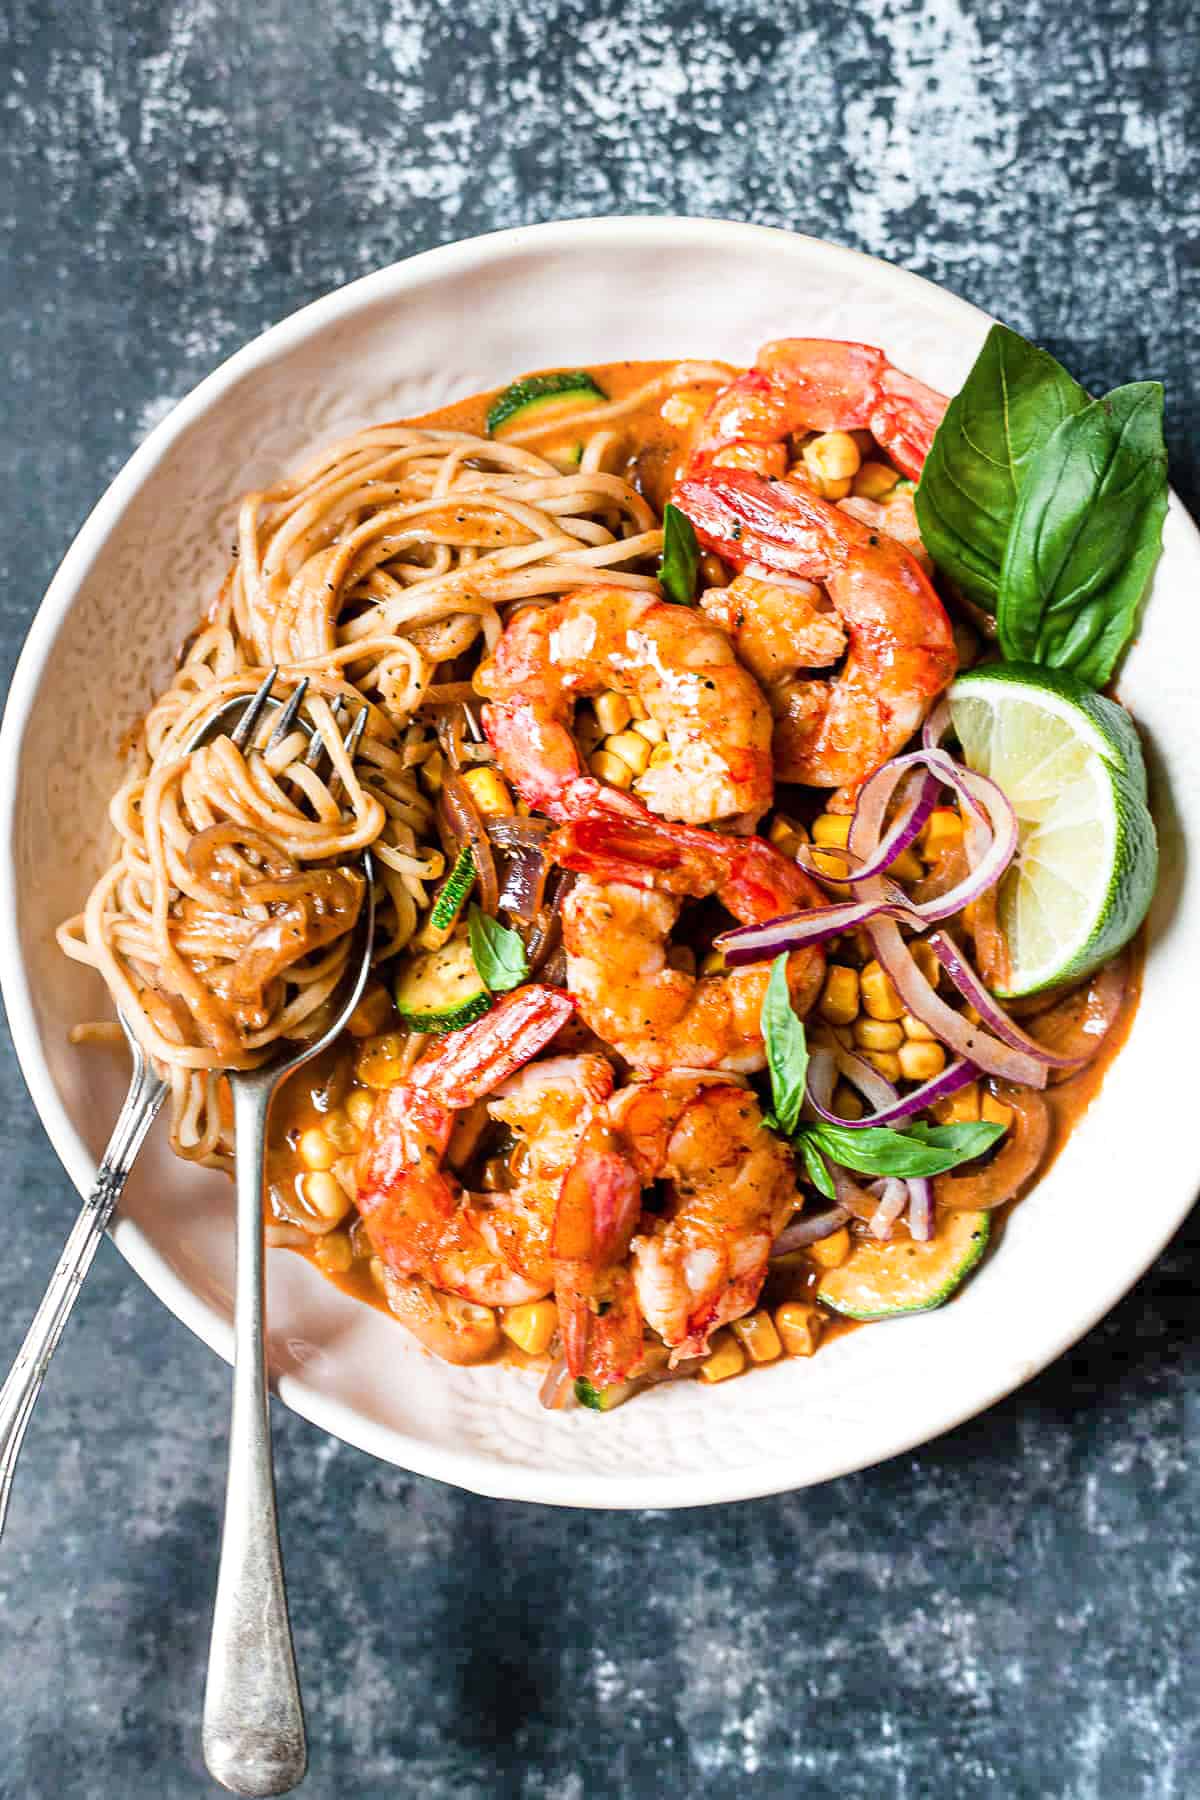 Red Thai prawn curry with noodles and vegetables in a bowl.